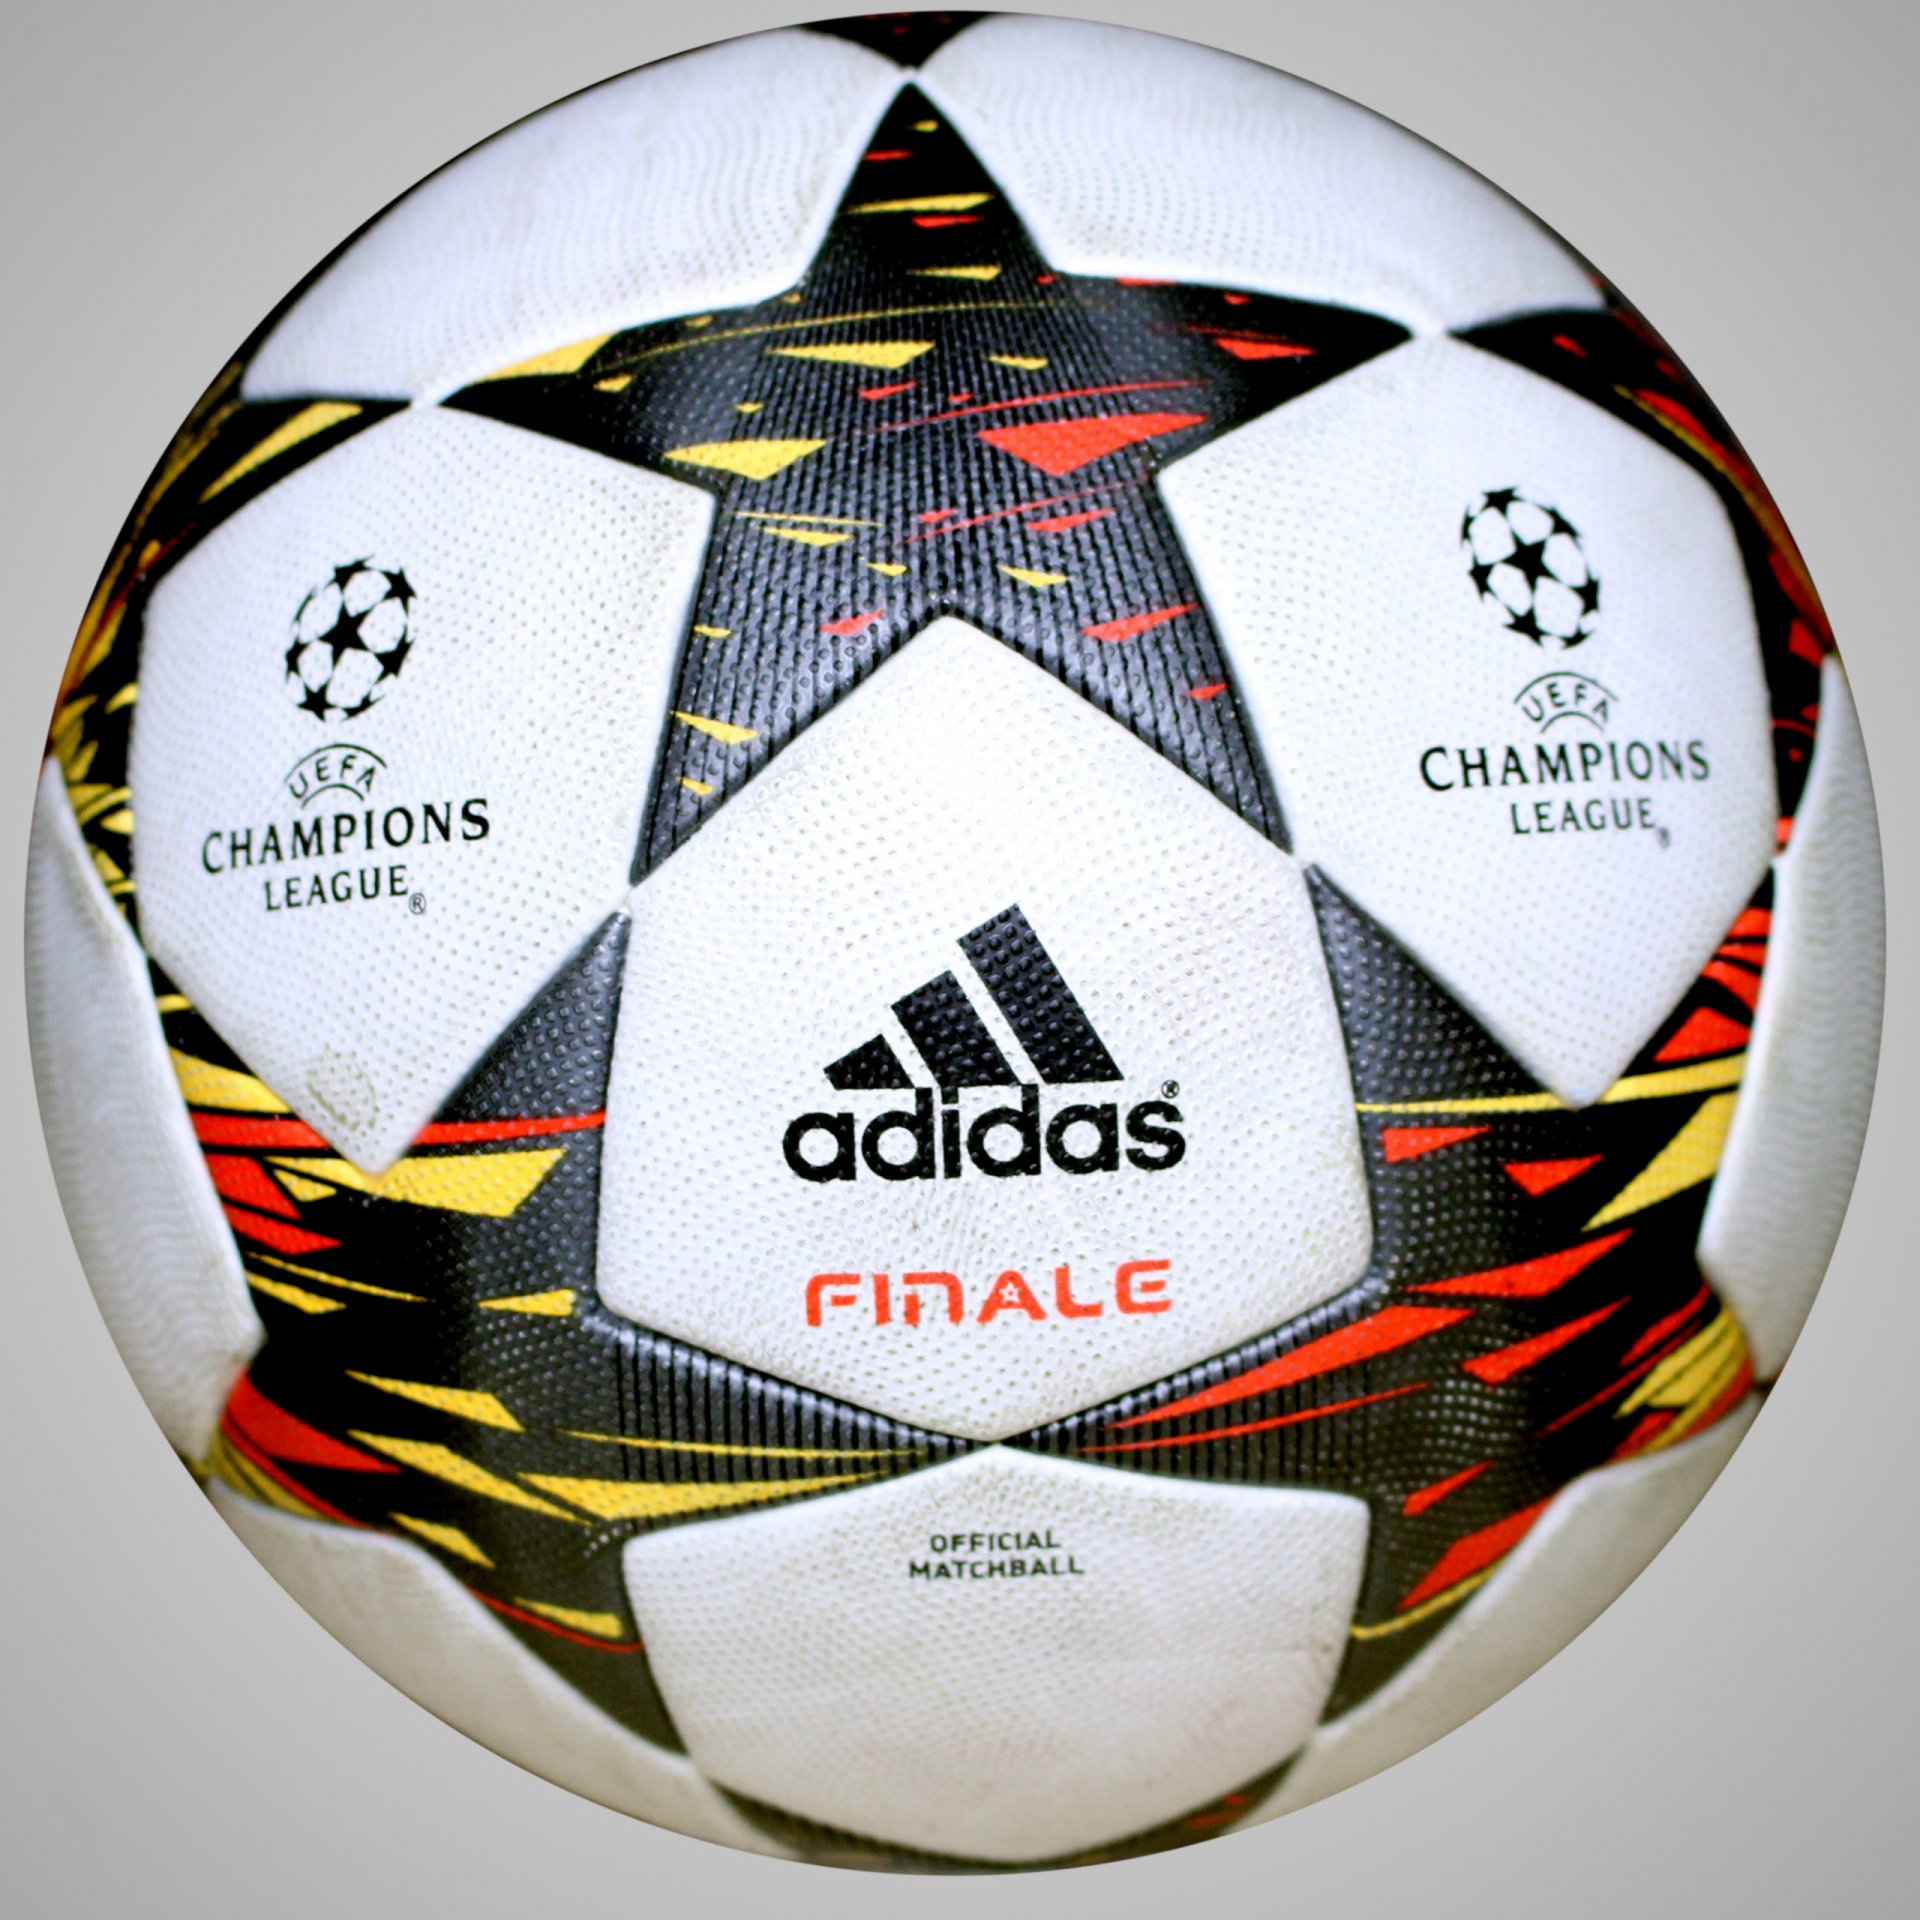 Adidas Champions League Finale 2015 Official Matchball